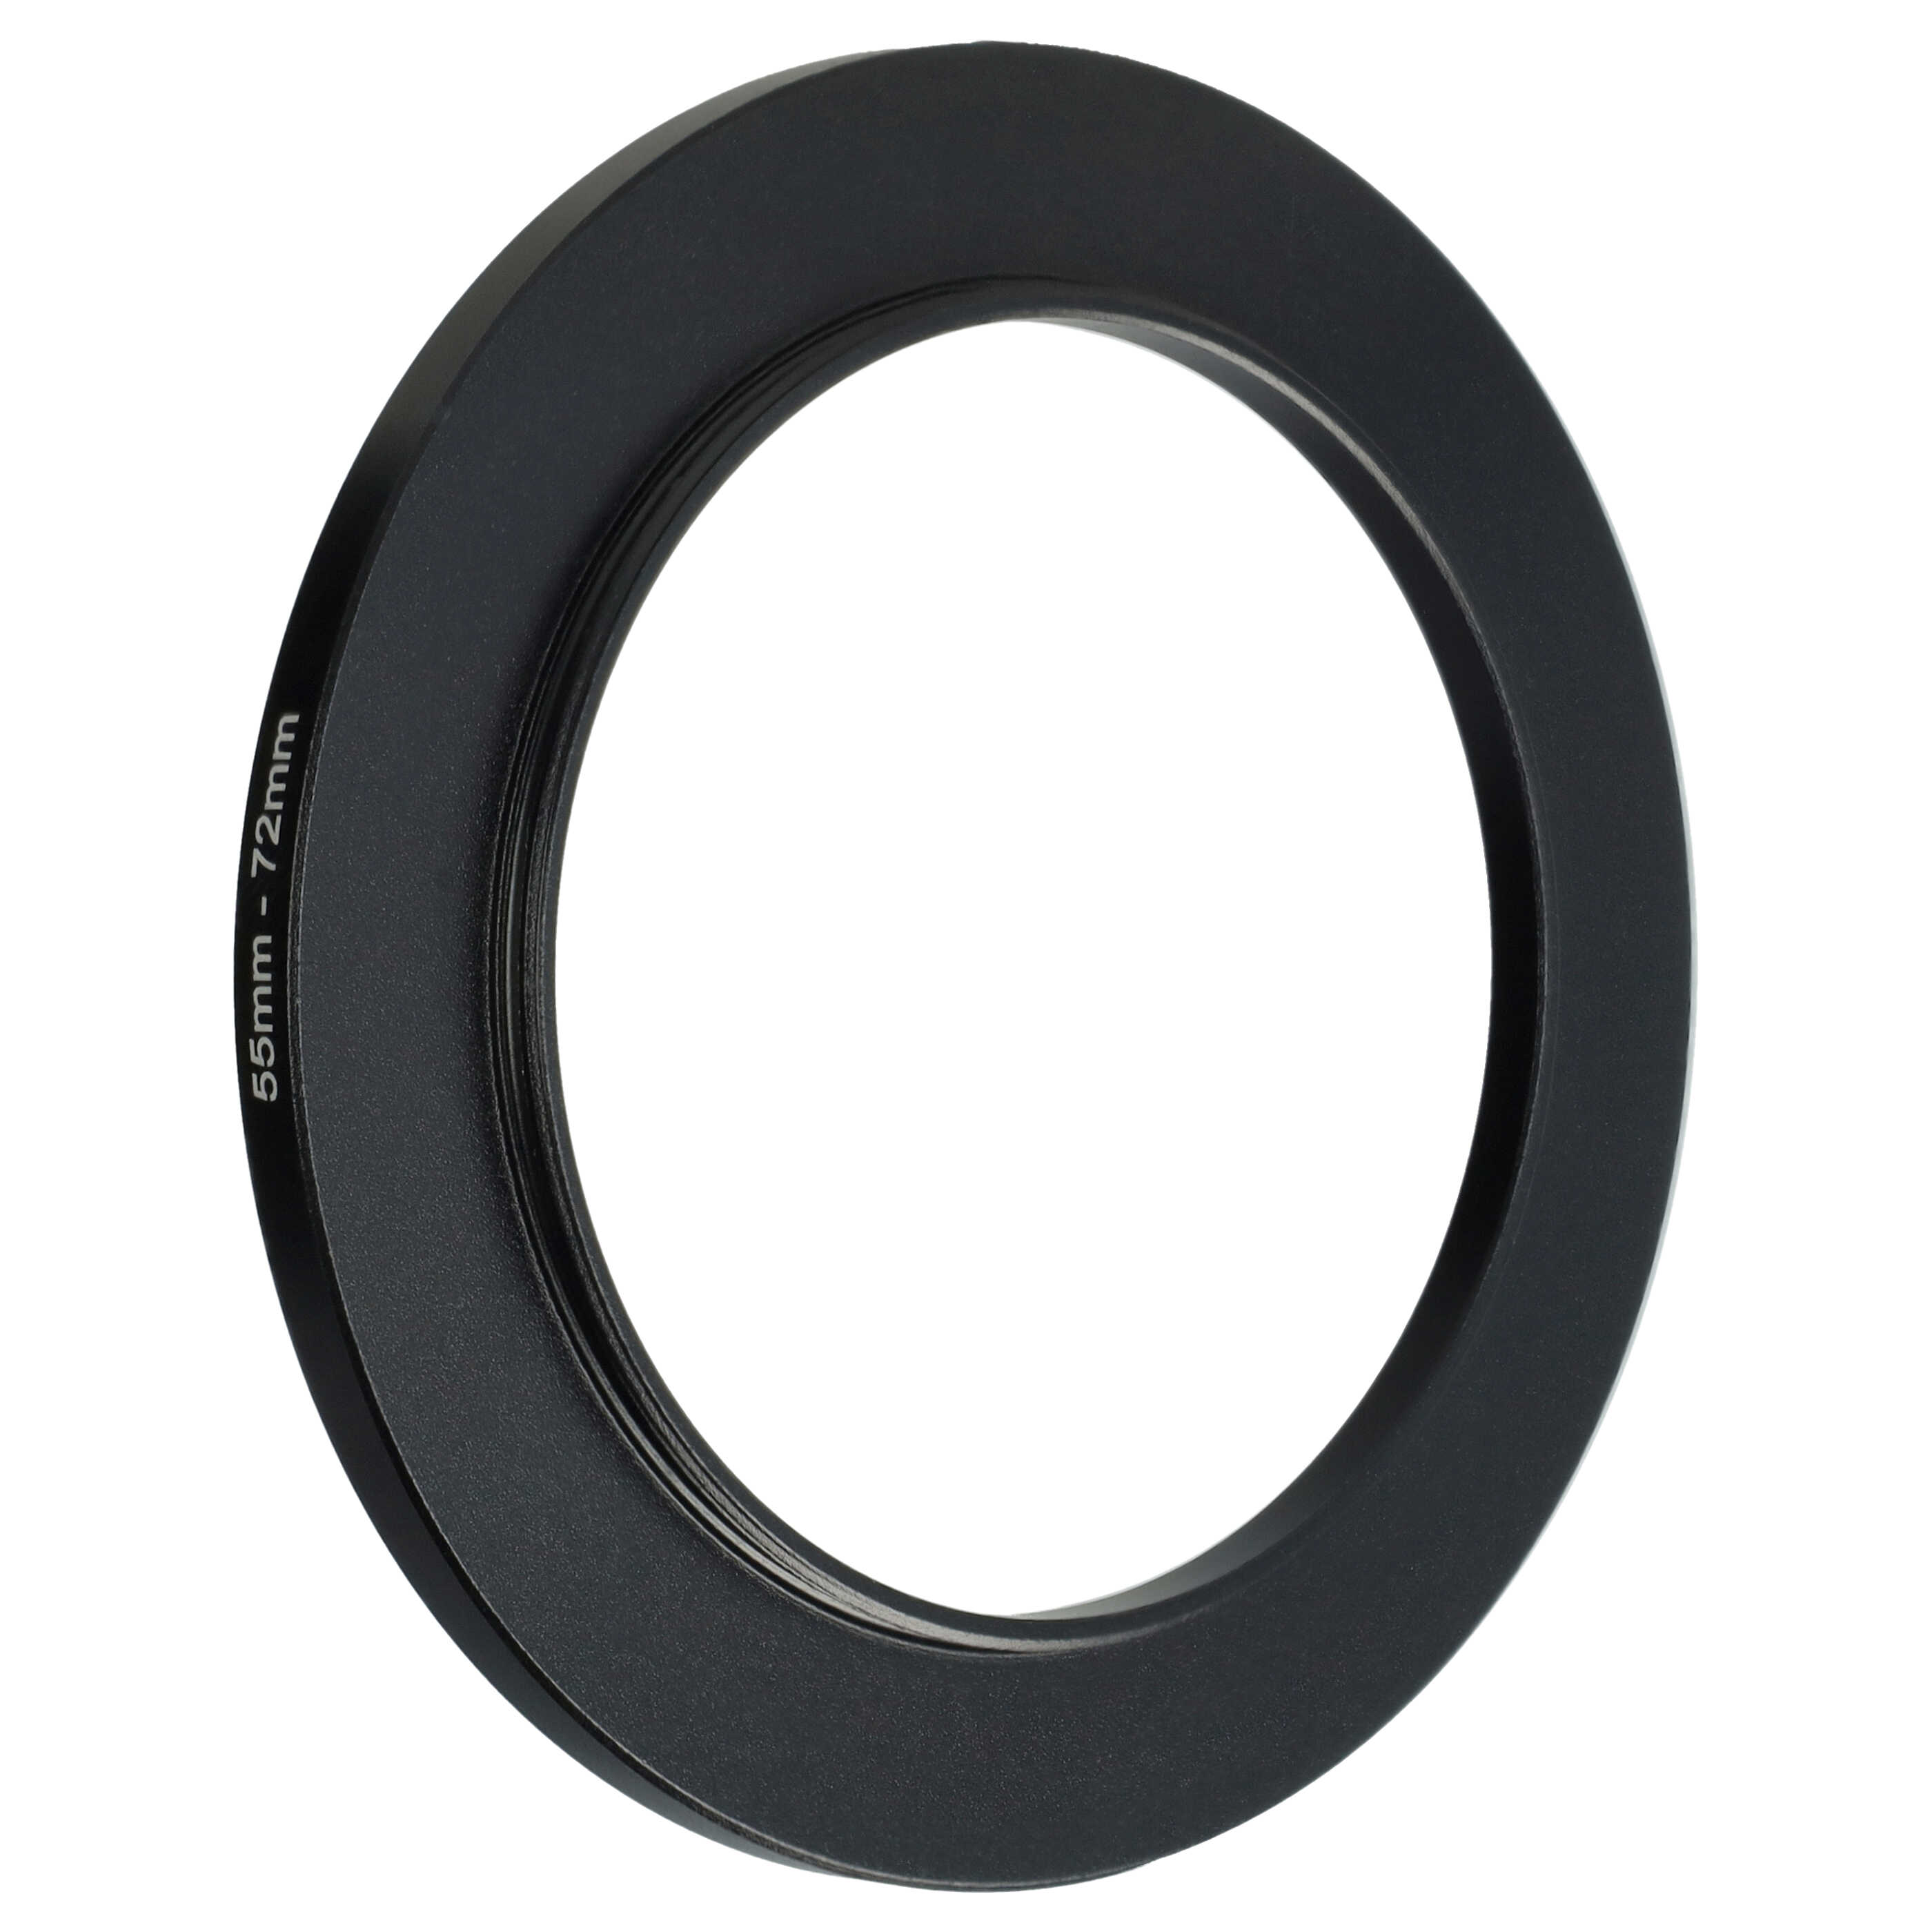 Step-Up Ring Adapter of 55 mm to 72 mmfor various Camera Lens - Filter Adapter